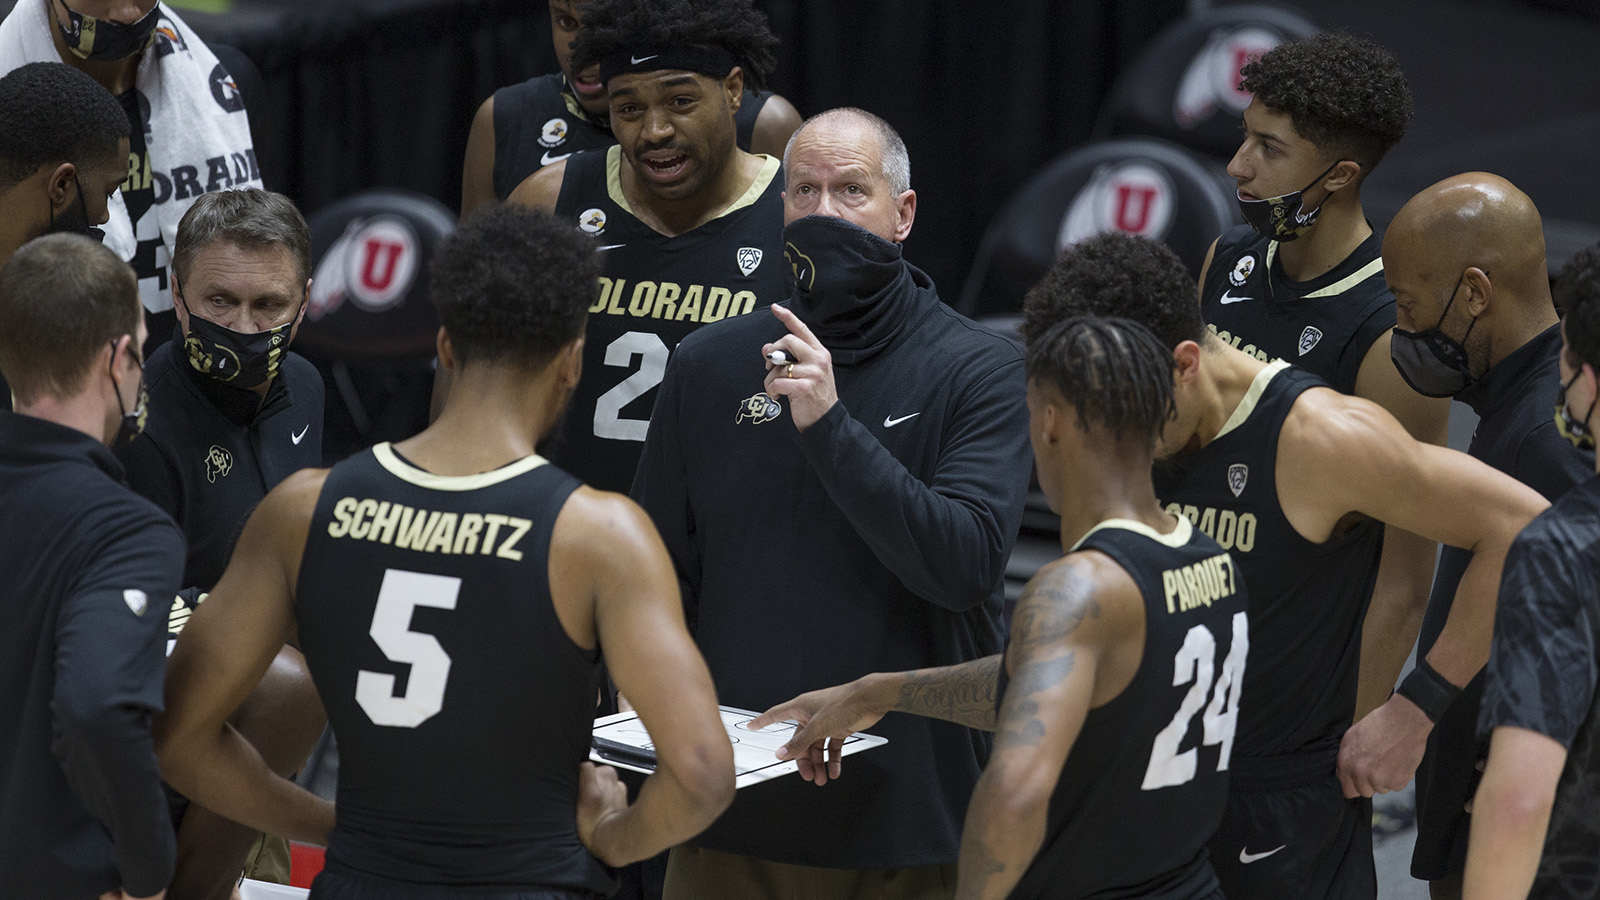 Head coach Tad Boyle of the Colorado Buffaloes talks to his team during a time out against the Utah Utes at Jon M. Huntsman Center on Jan. 11, 2021 In Salt Lake City. 